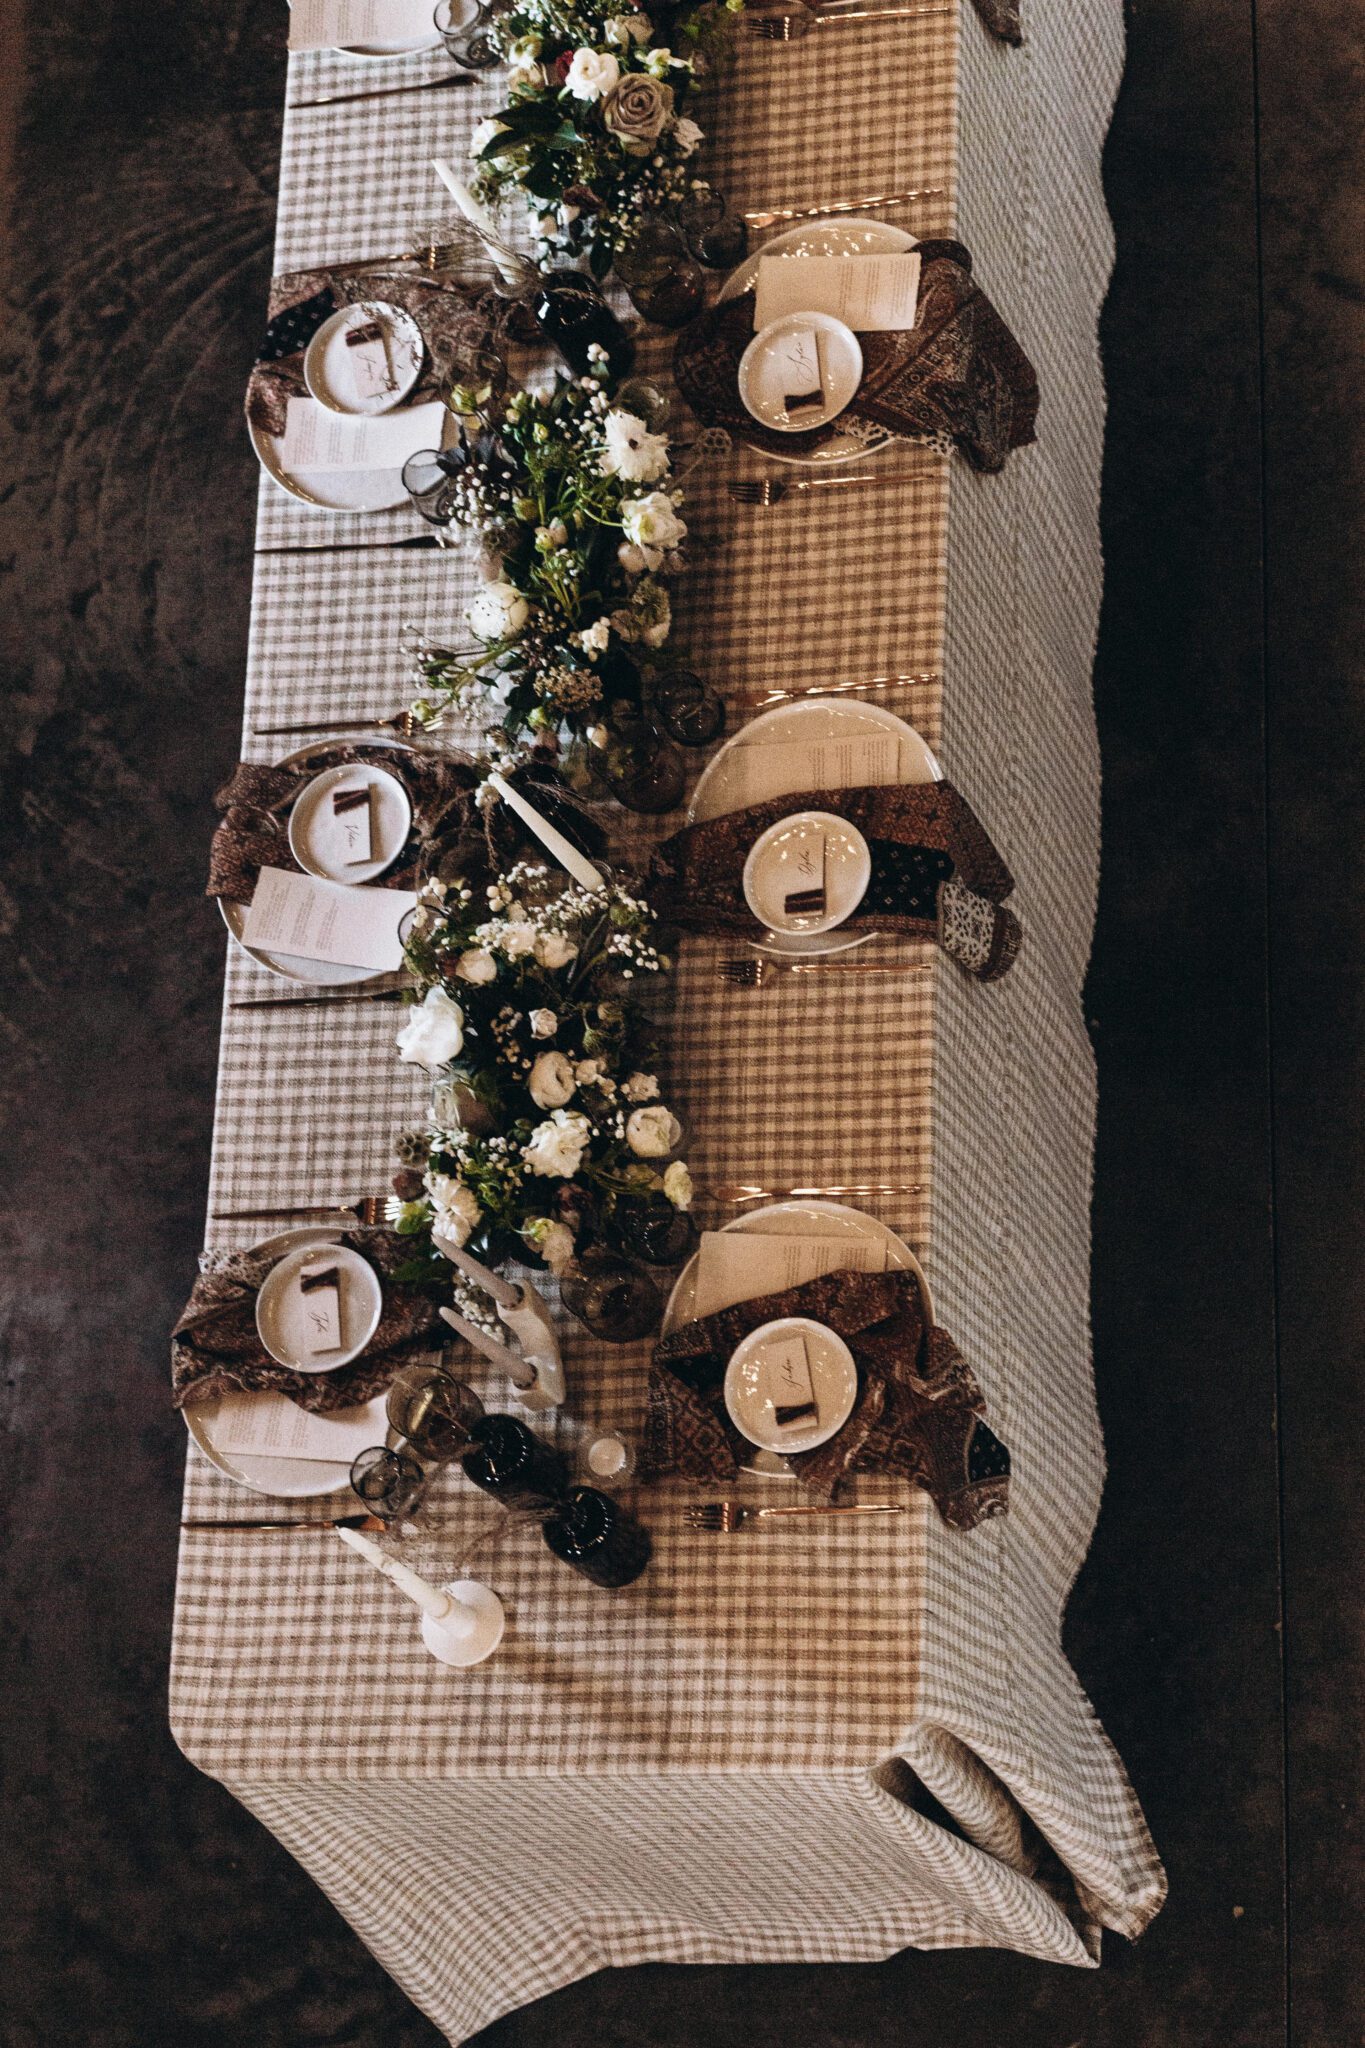 Country Chic style wedding inspiration with patterned tablescape, checkered and textured linens, unique and earthy florals covering the table, flatlay style photo. 